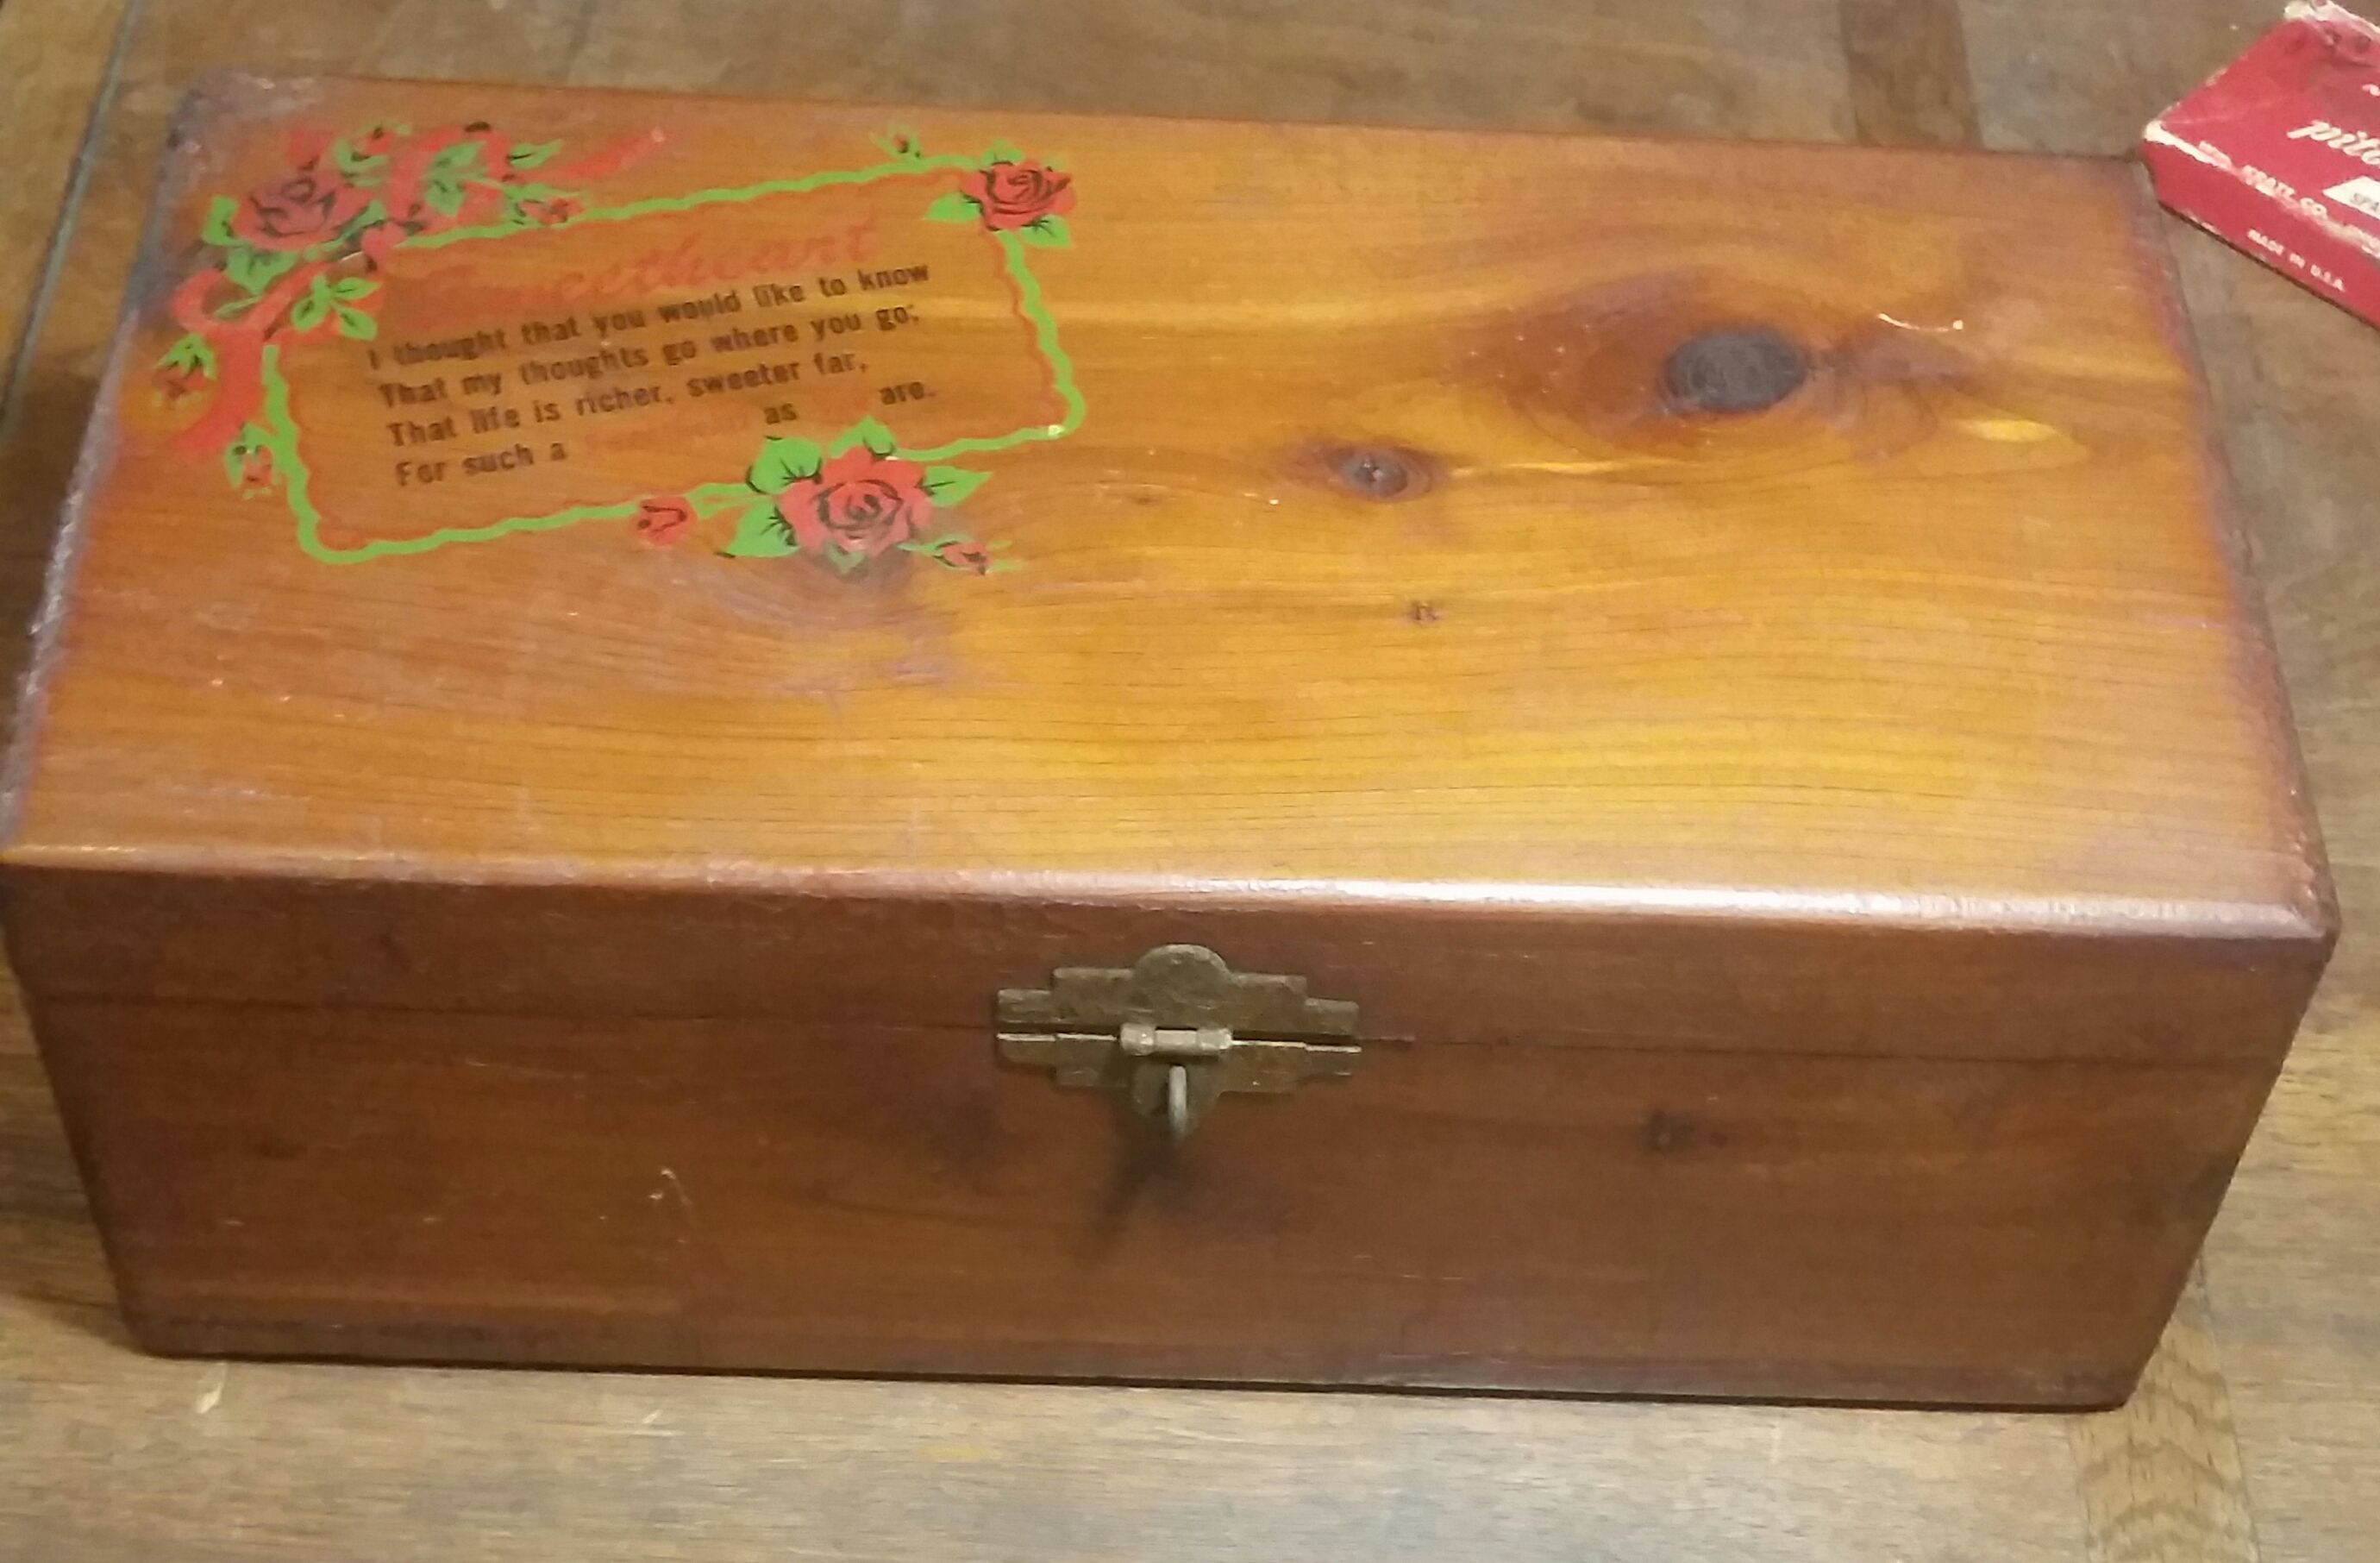 Vintage jewelry box with sweetheart poem